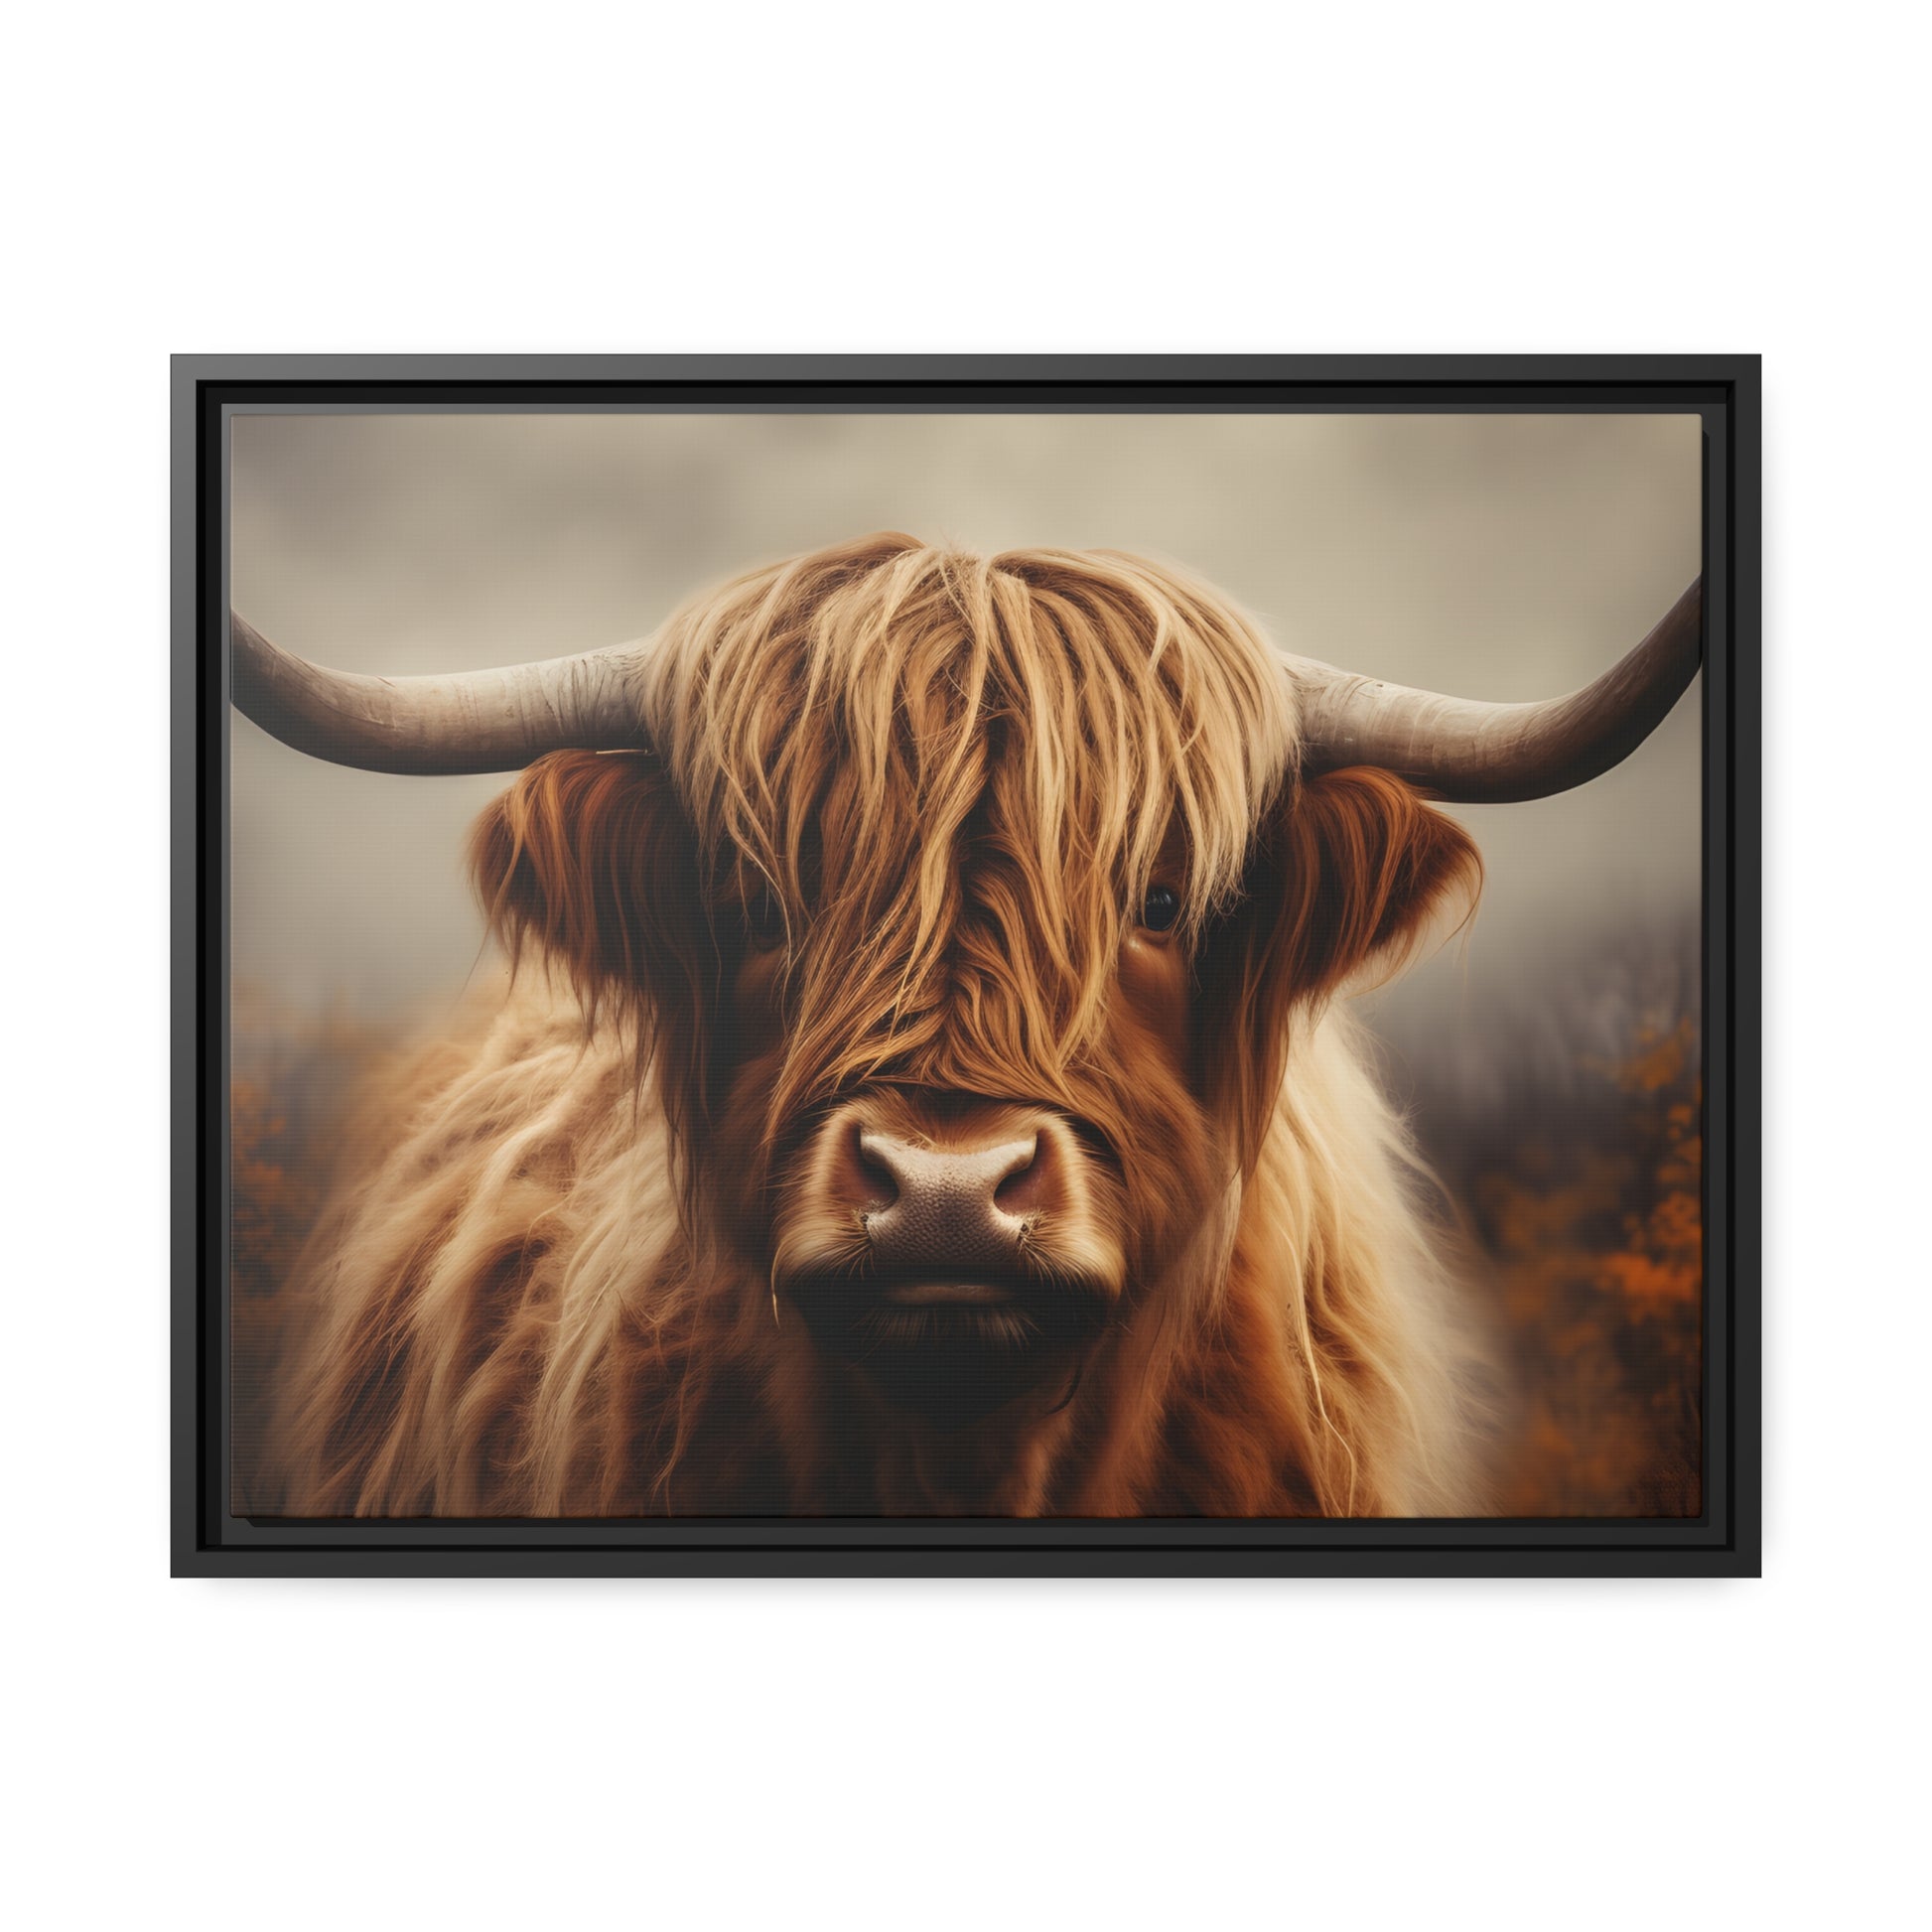 Framed Canvas Artwork Strong Stunning Highlander Bull Warm Fiery Background Emotional Staring Into The Viewer Captivating Highly Detailed Painting Style Perfect To Warm Up A Homestead Or Country Home